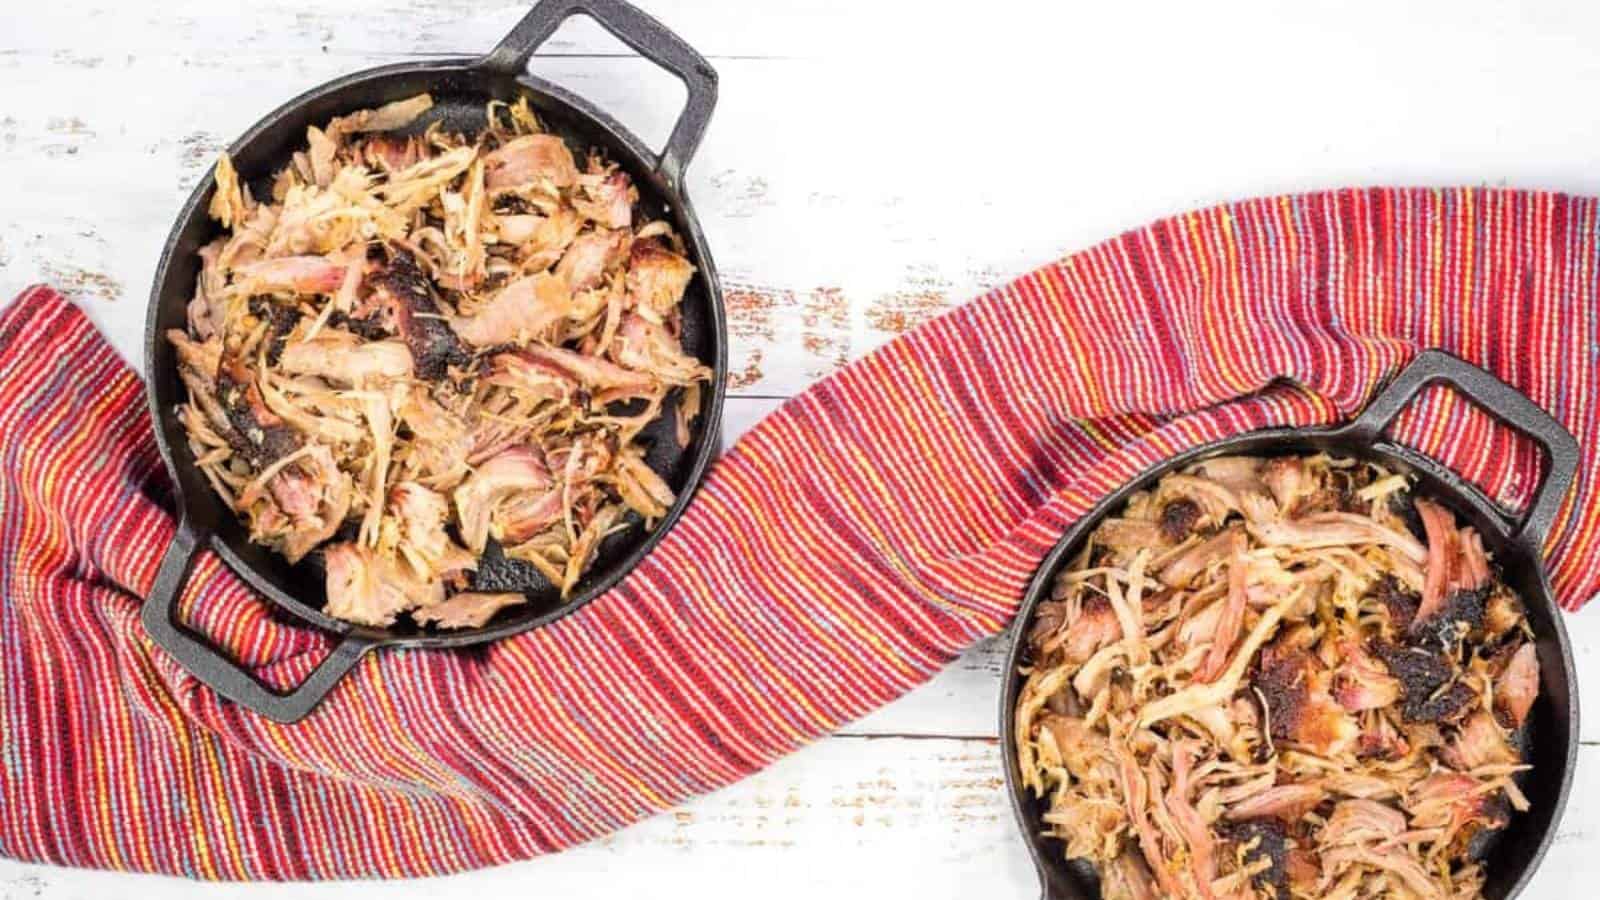 Two cast iron skillets with smoked pulled pork in them.